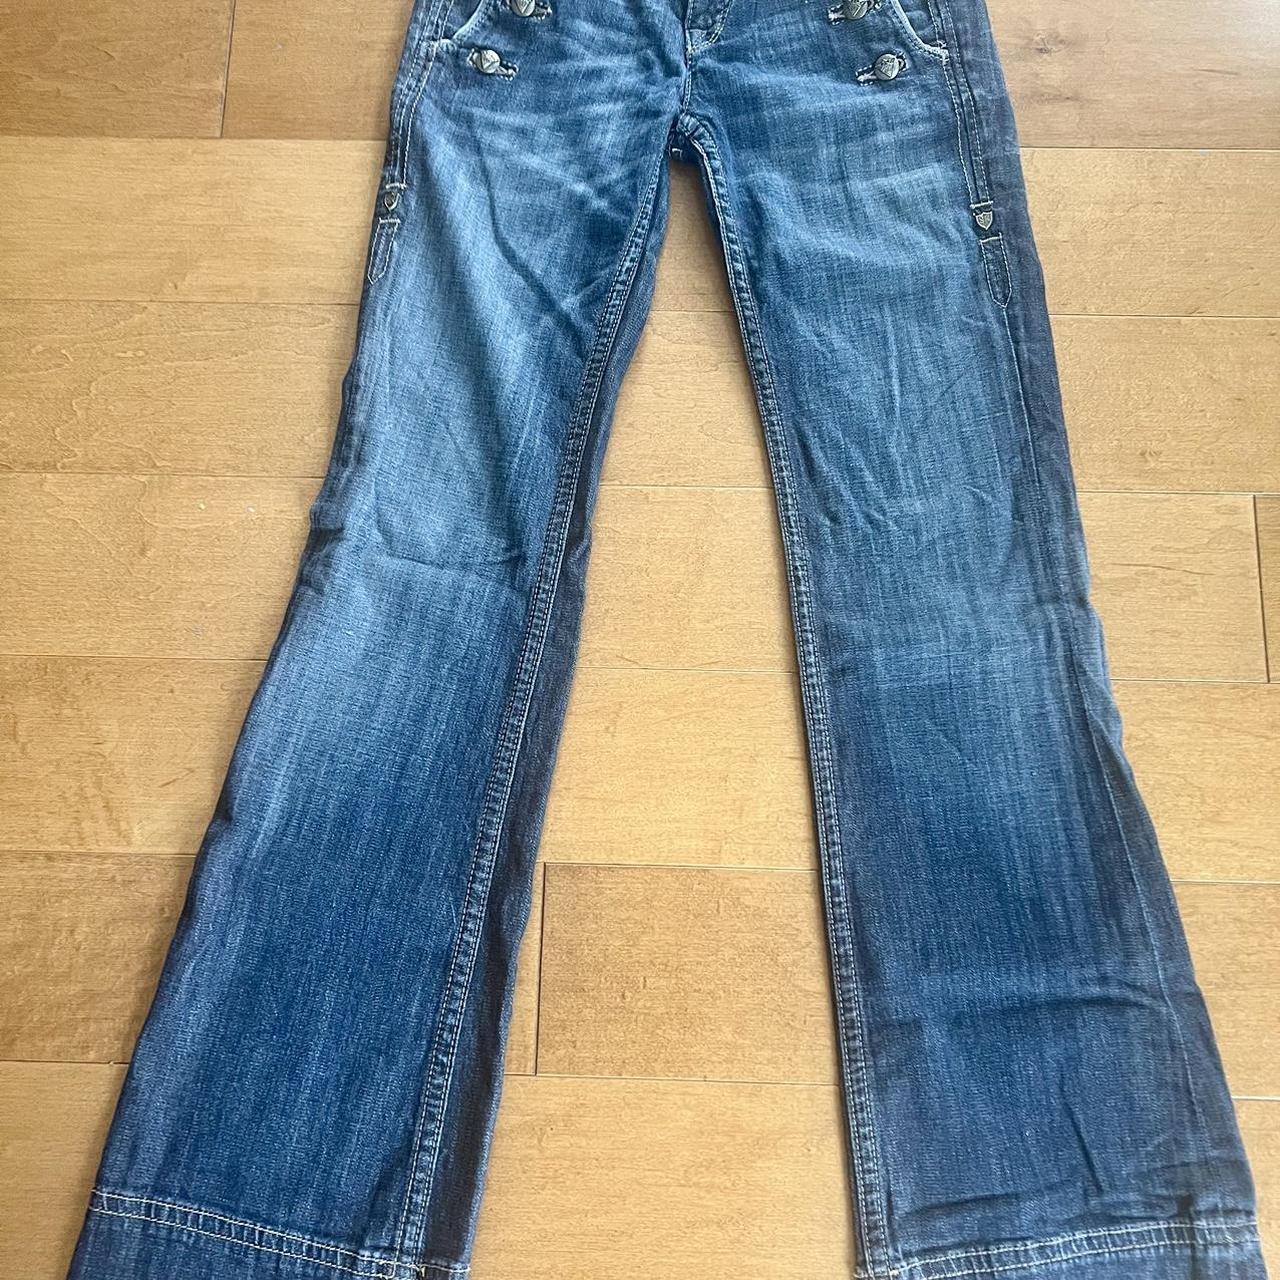 Gang Real Low-rise jeans- Size 27 Inseam 33 Great... - Depop